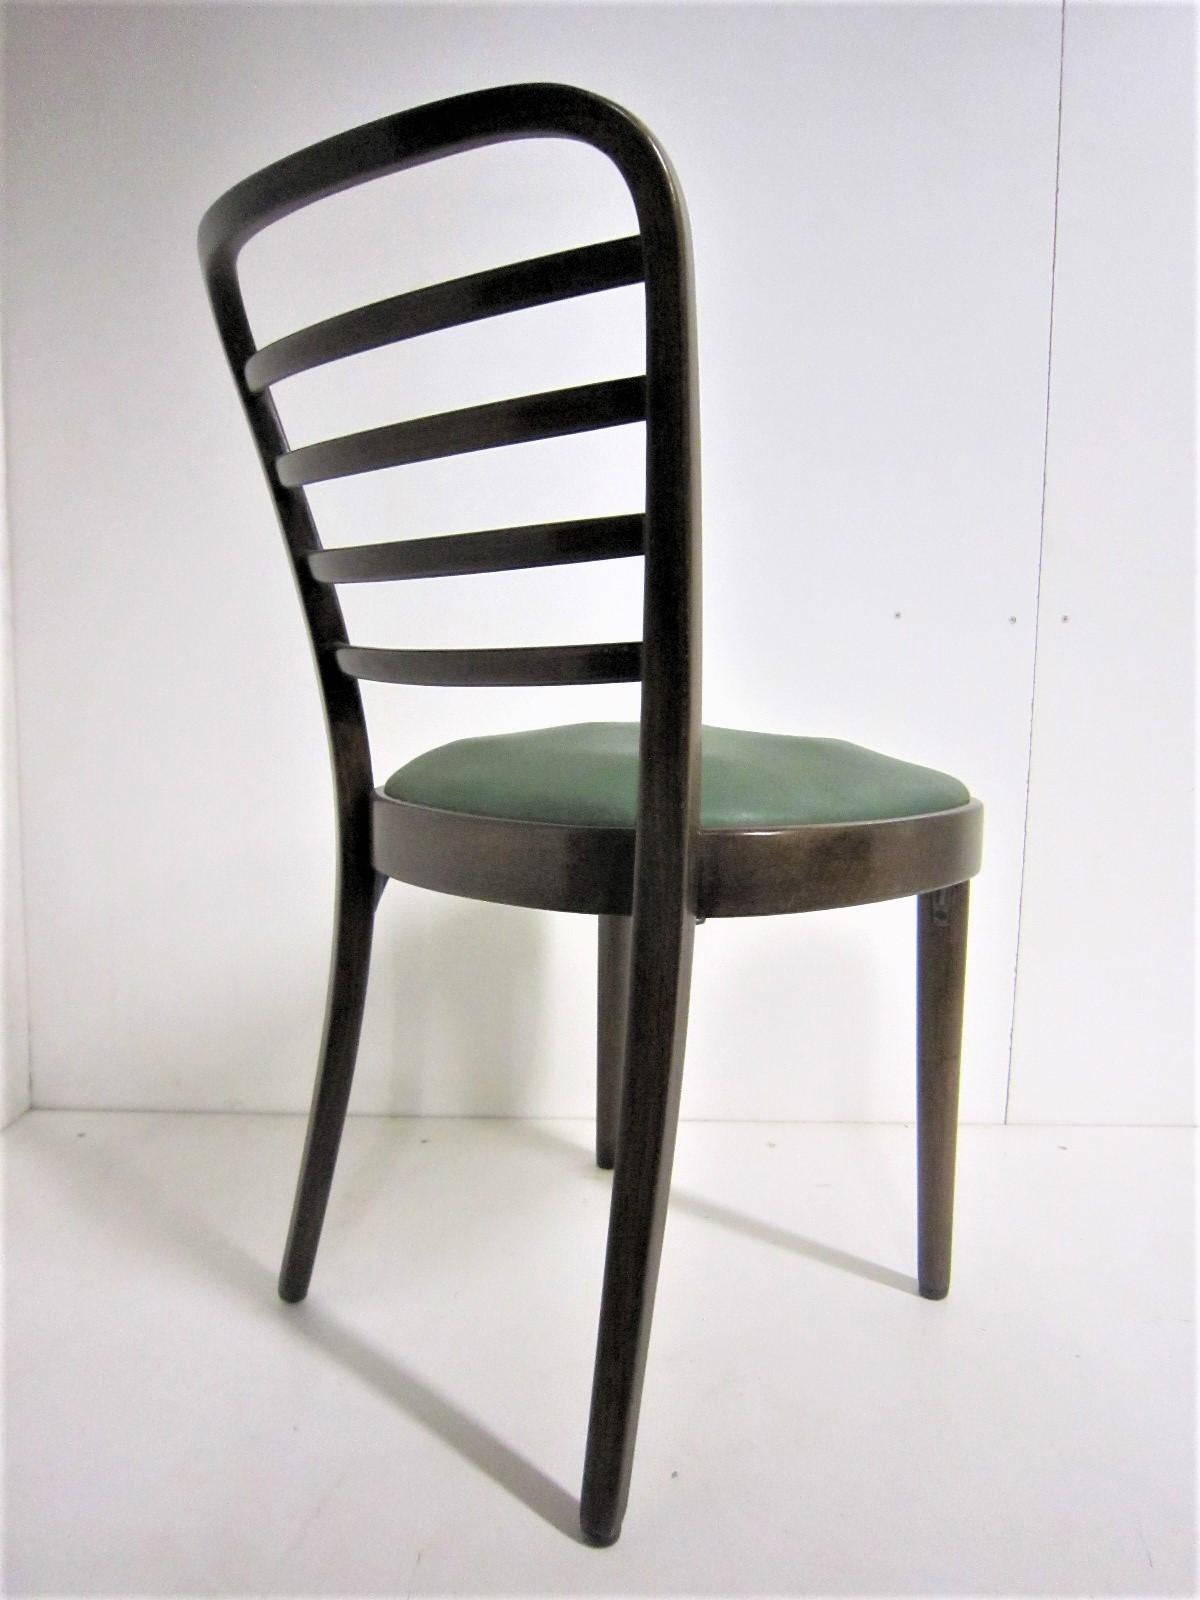 20th Century Set of Eight Original Josef Frank Bentwood Chairs, Six Sides and Two Arms